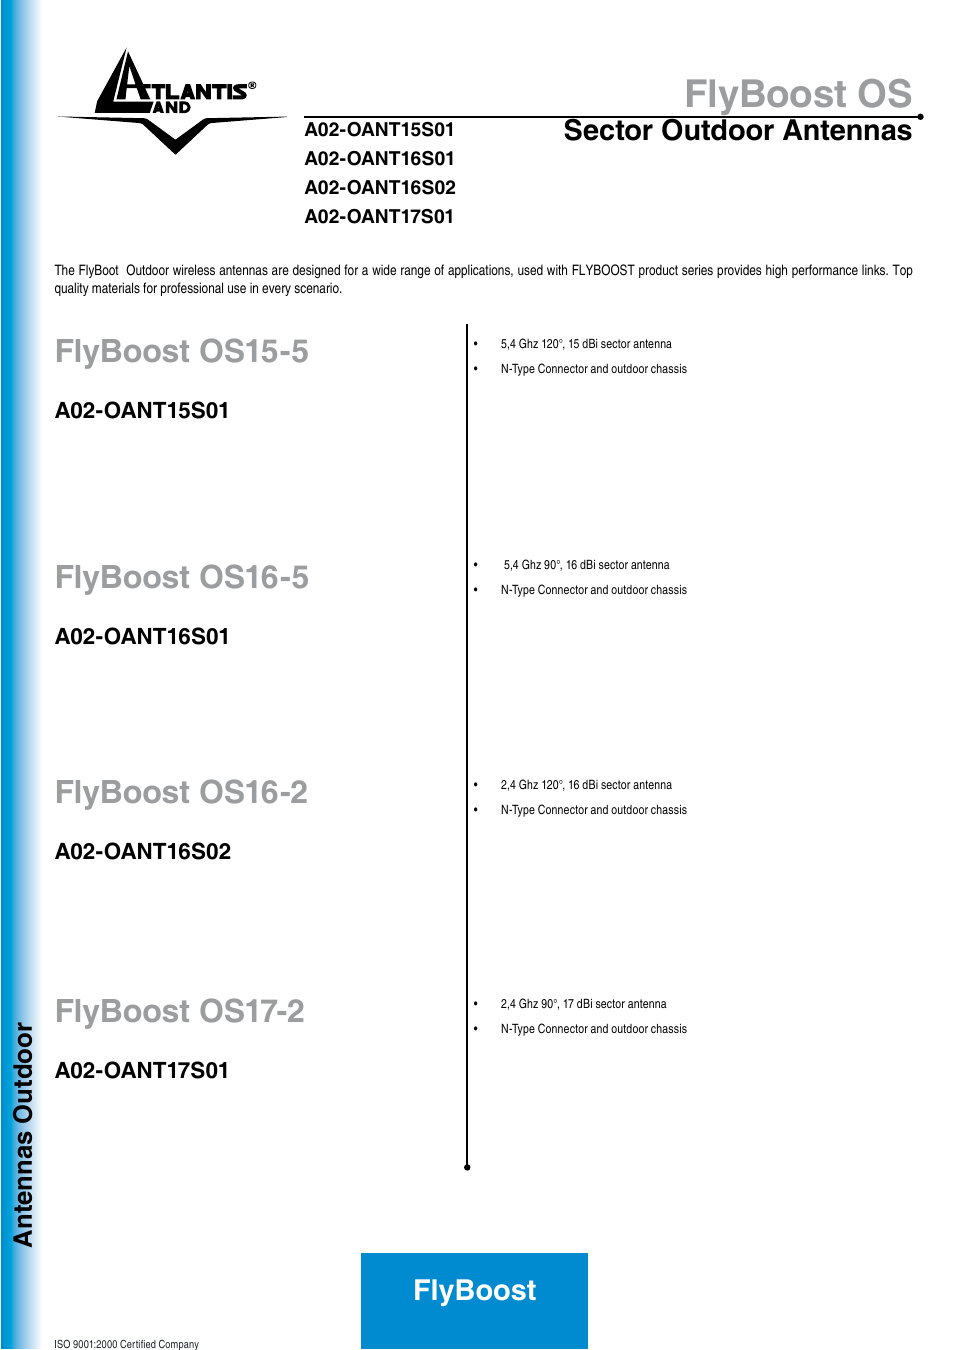 FlyBoost OS Sector Outdoo